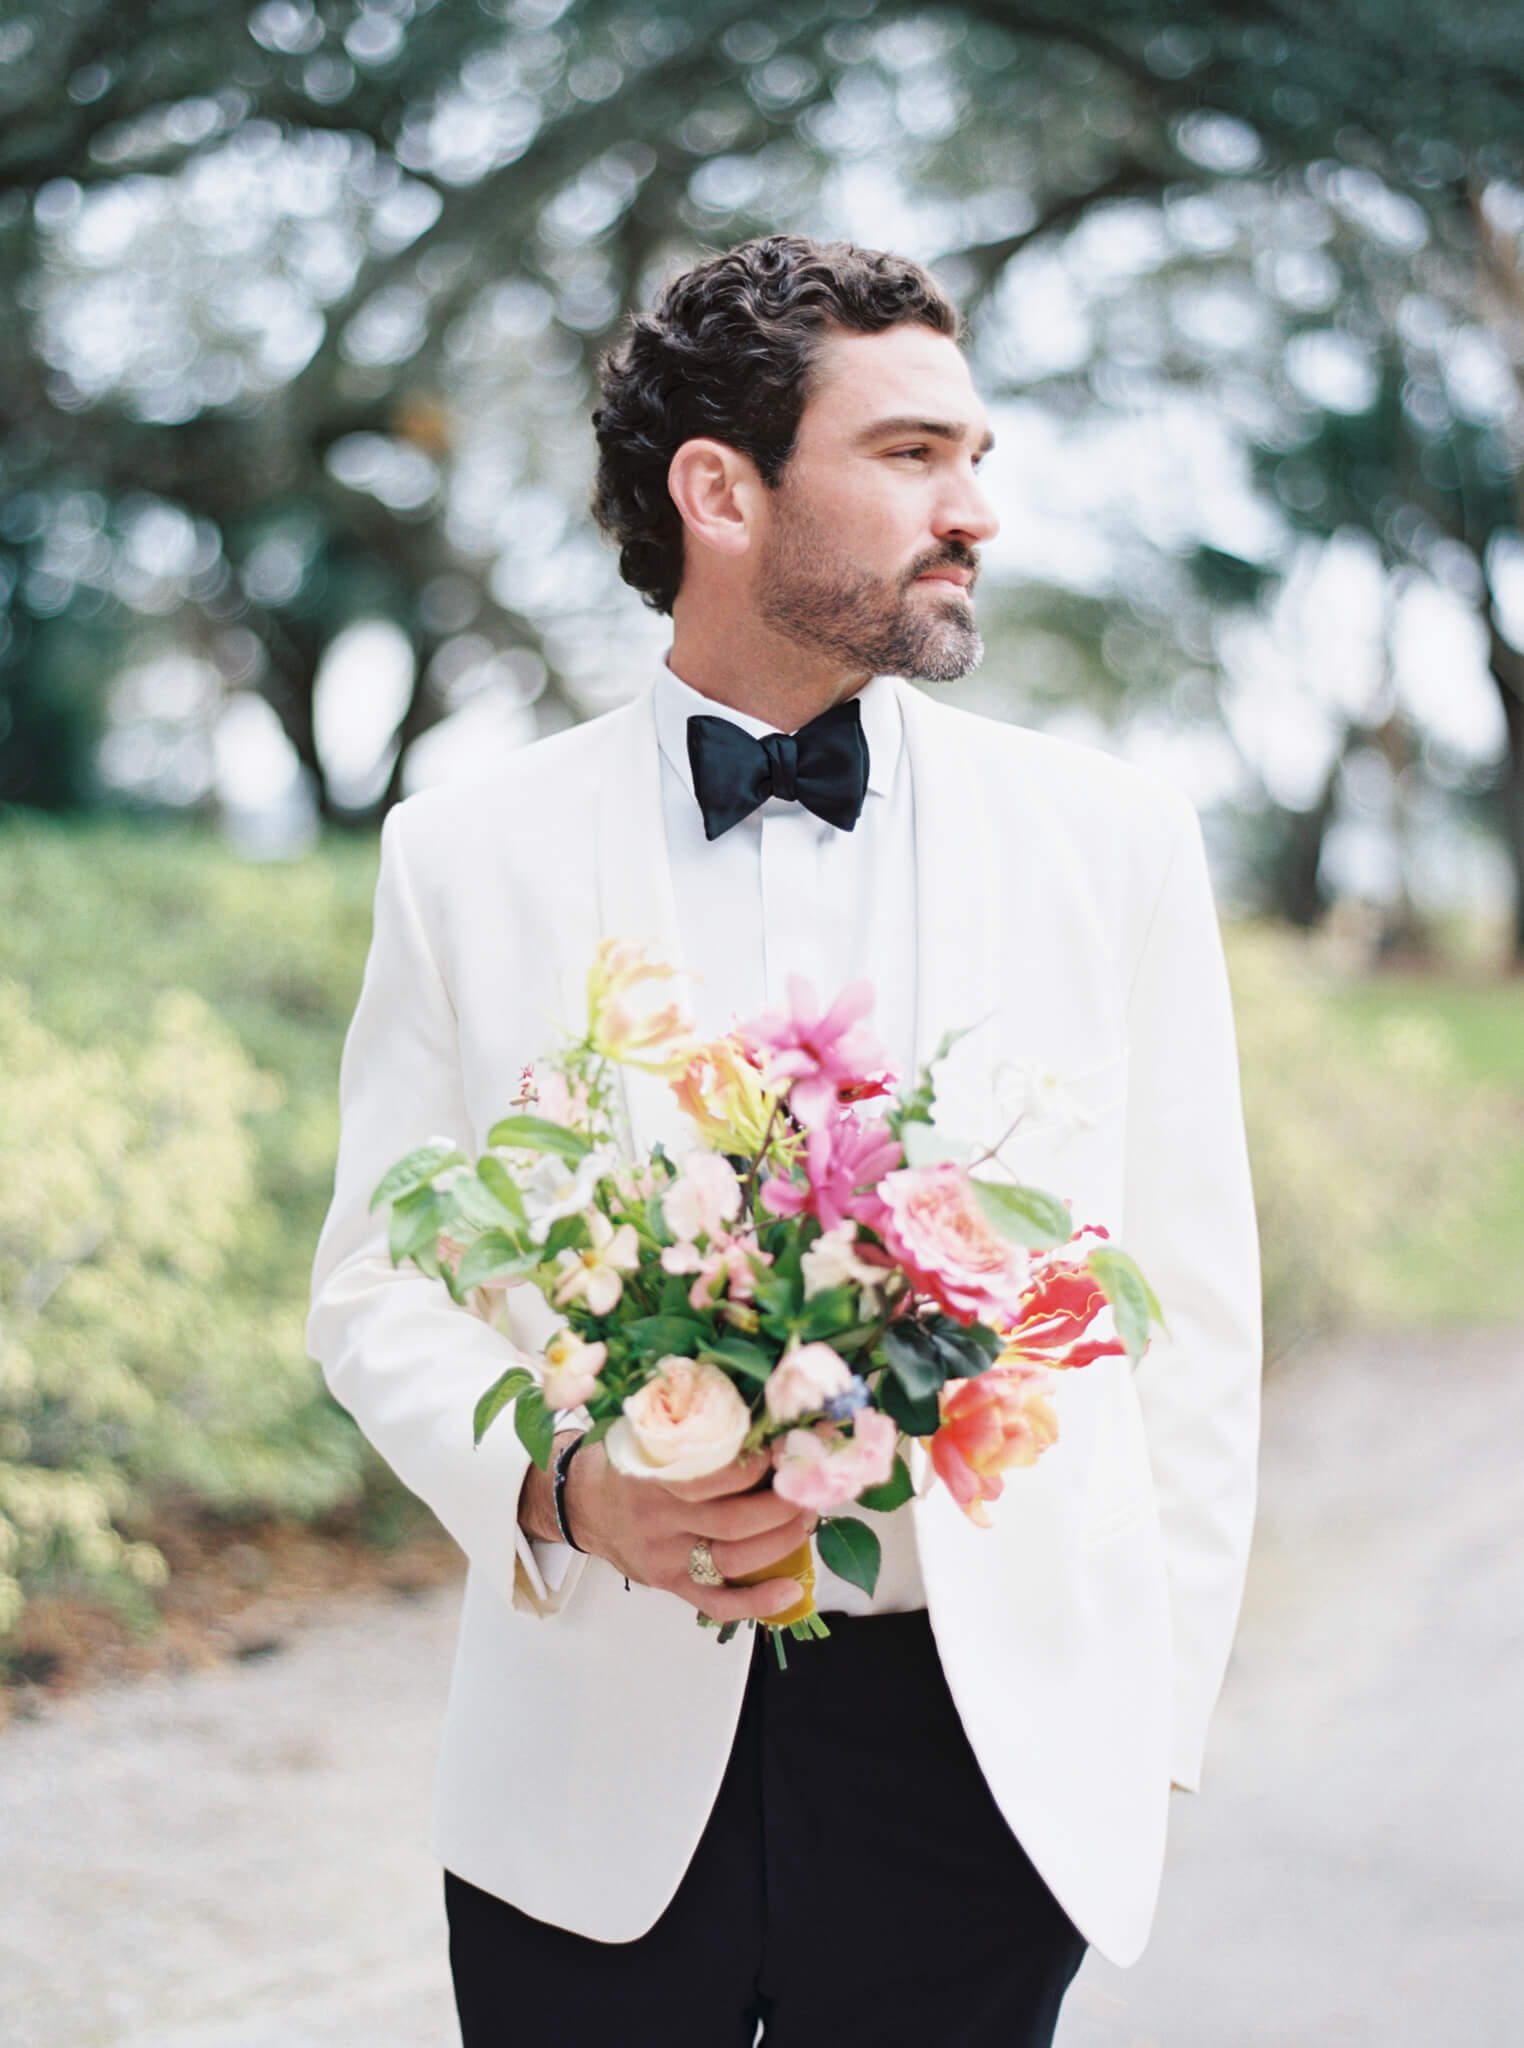 Closeup of a groom in a white and black tuxedo looking to the side while holding a pink and yellow bouquet of flowers.